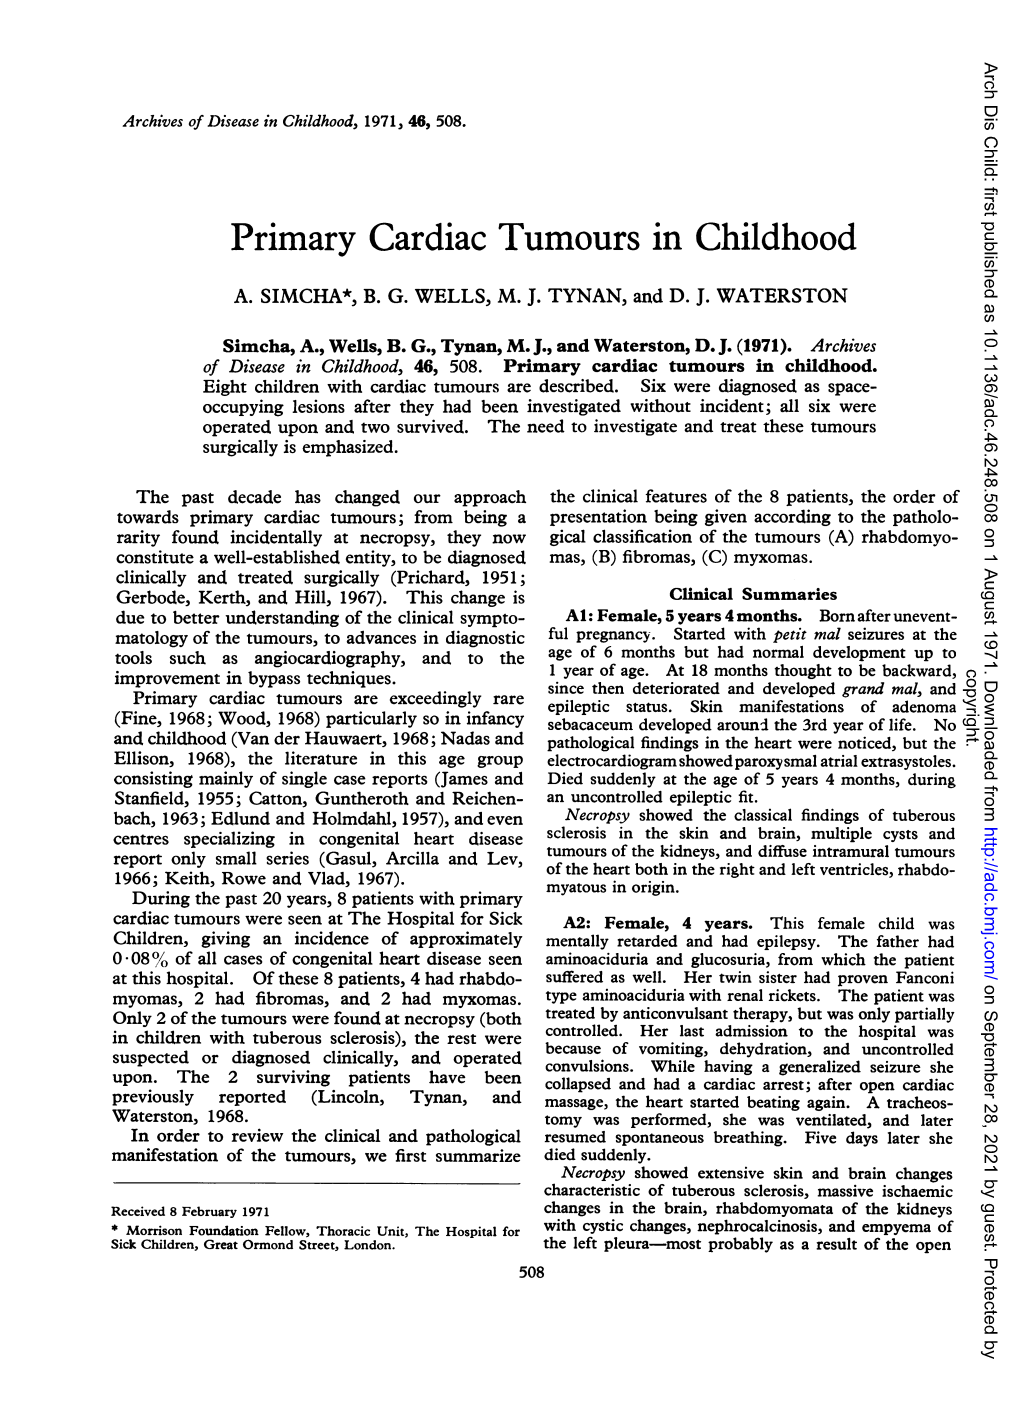 Primary Cardiac Tumours in Childhood